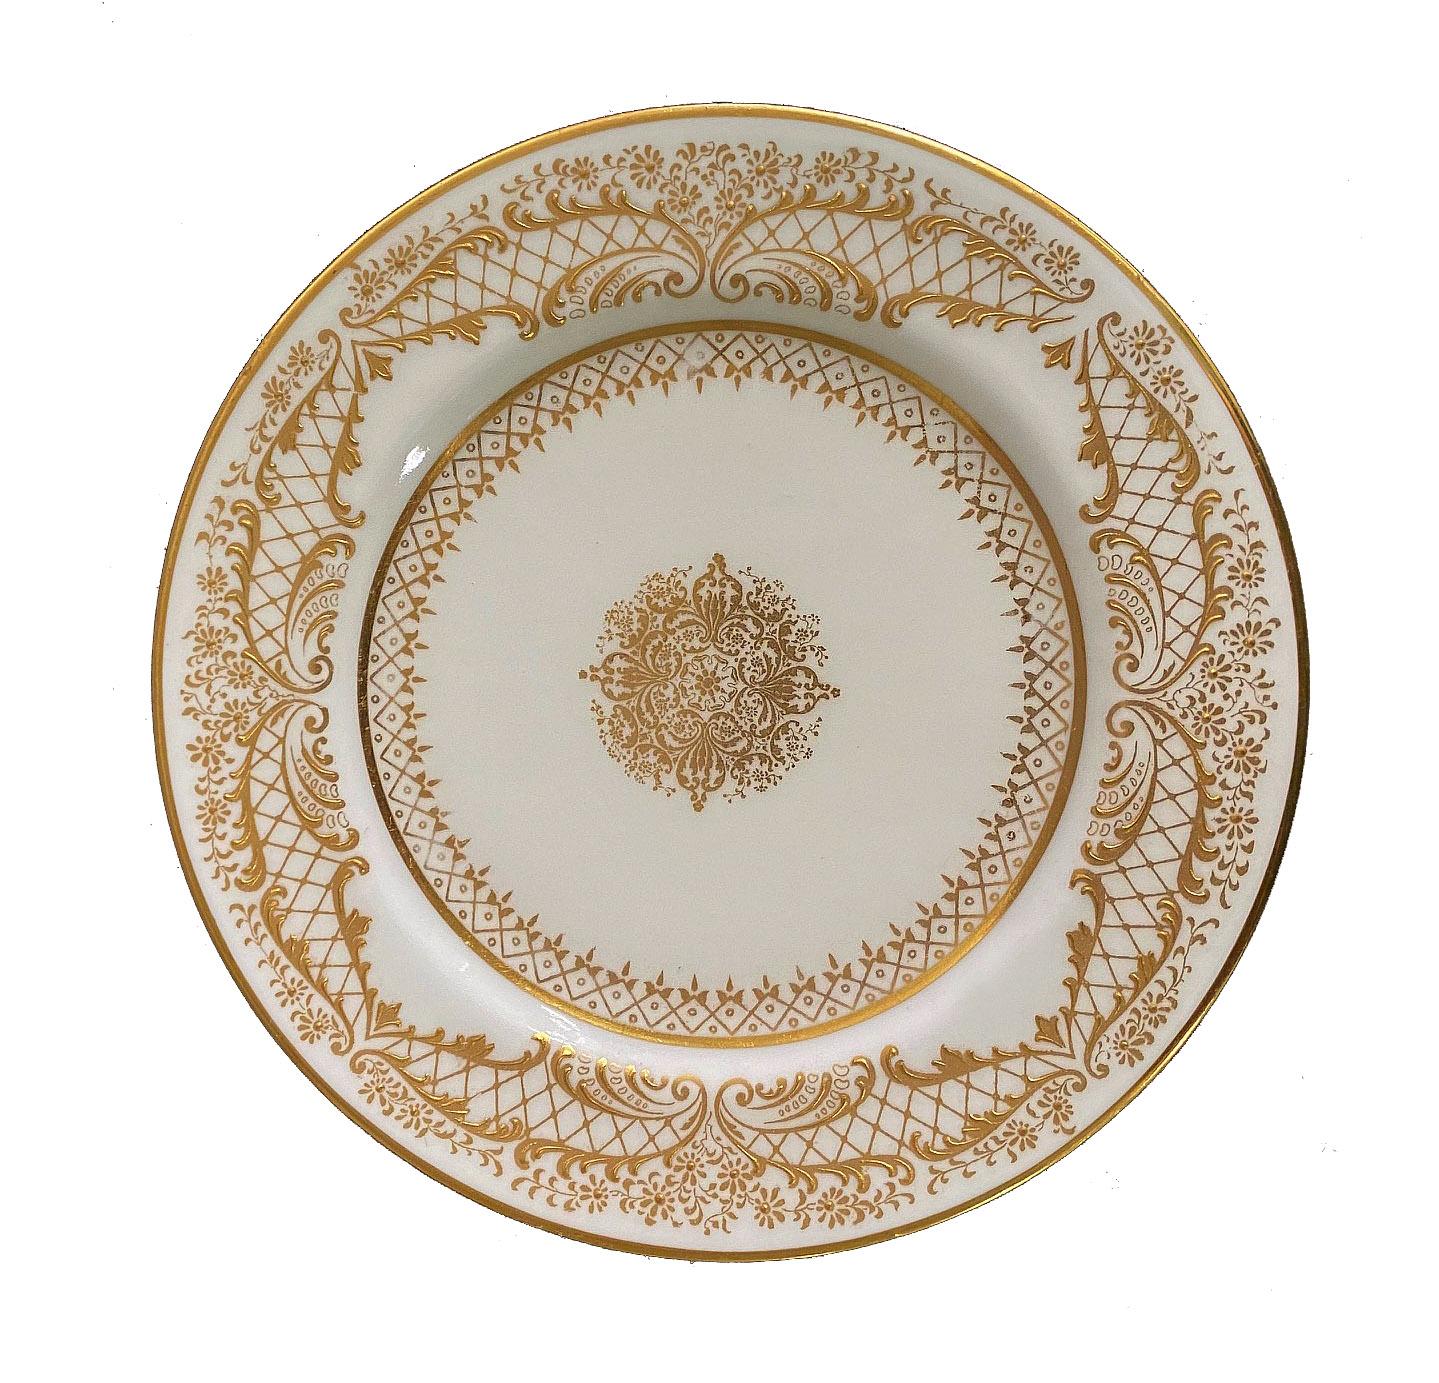 A lovely set of fourteen early 20th century English Royal Doulton bread plates

Finely decorated with raised gold.

Stamped Royal Doulton England and Gilman Collamore & Co. on the back of the plates.